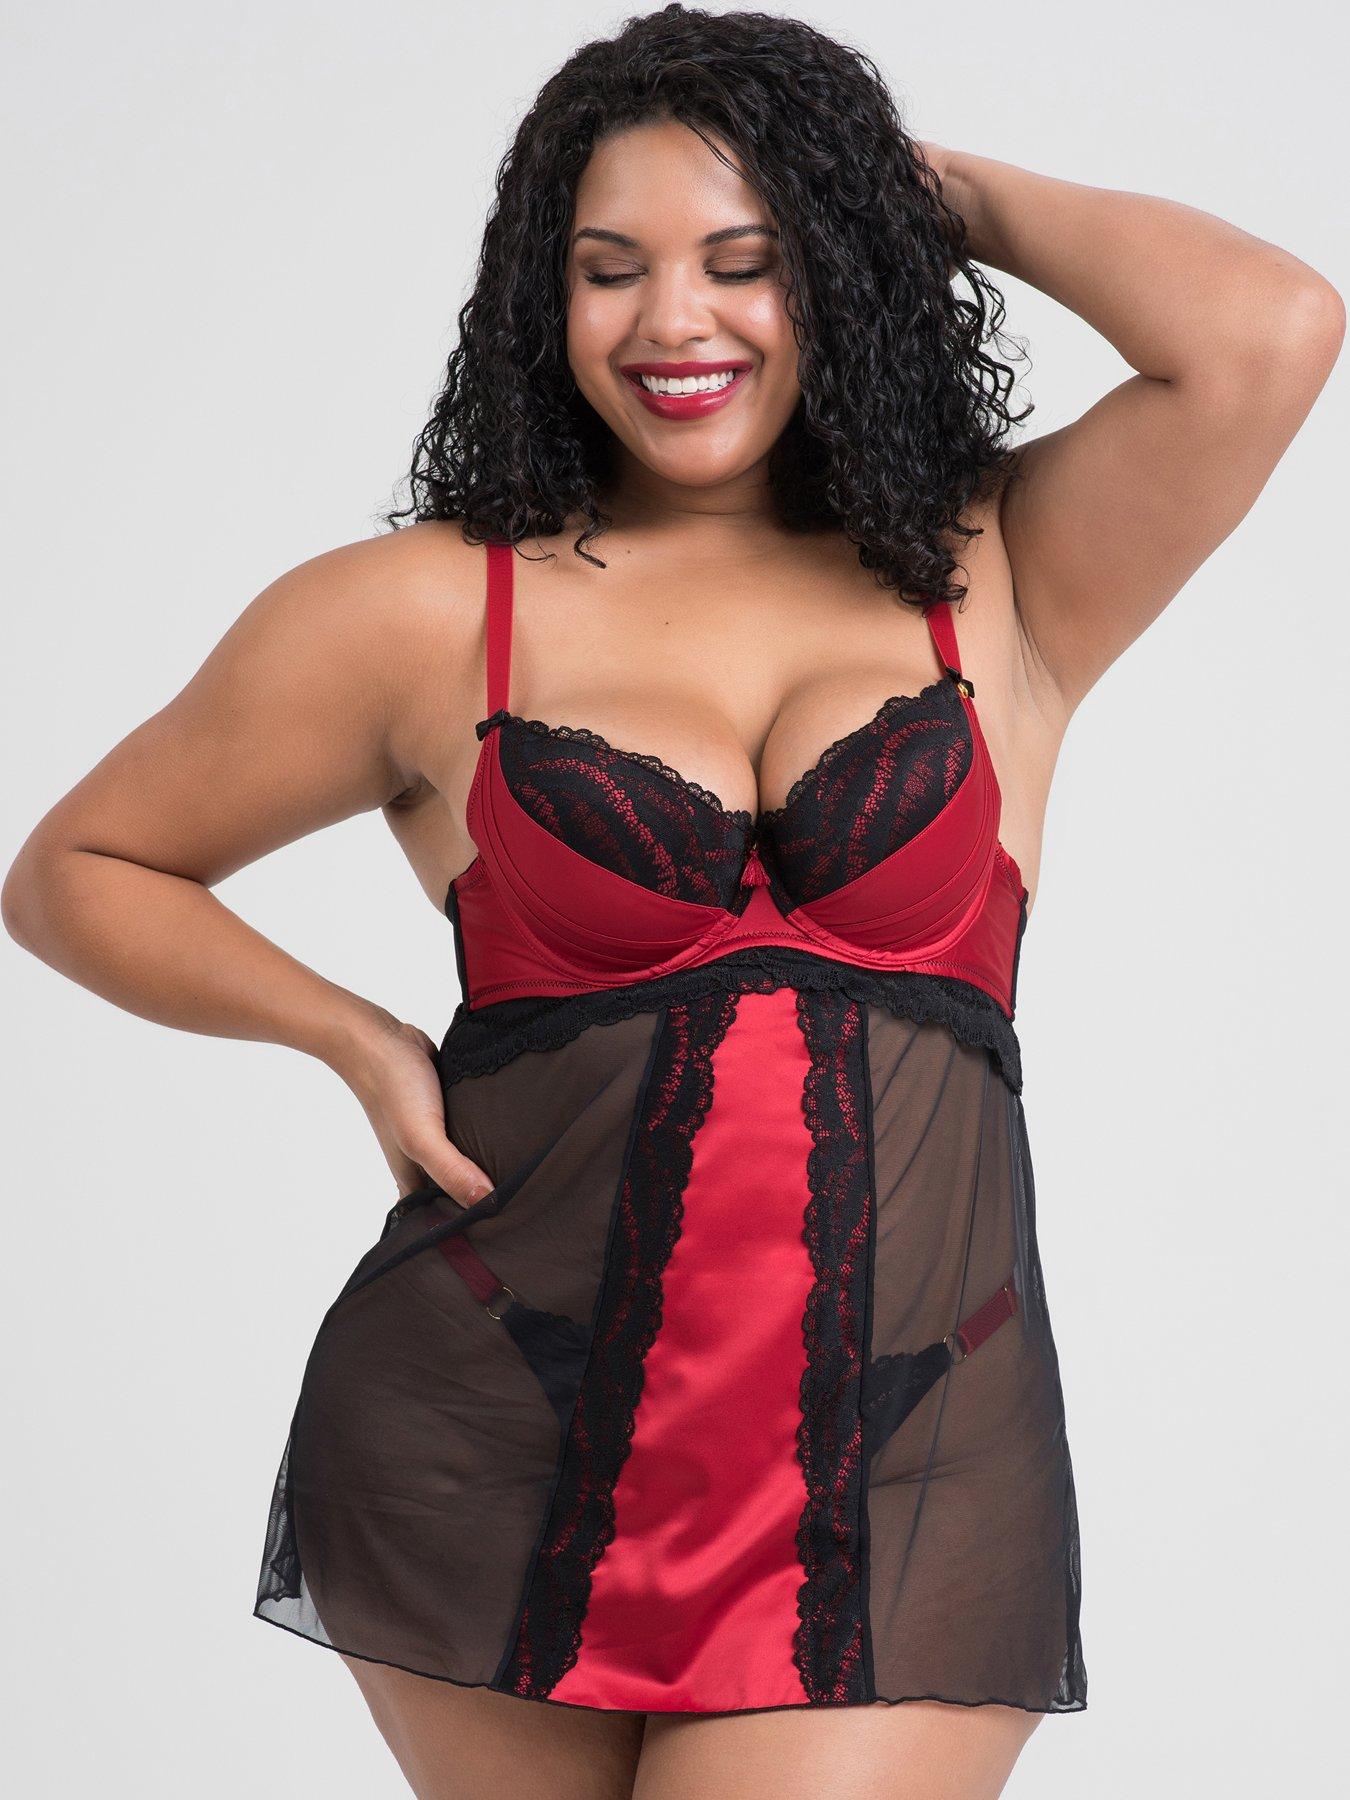 Lovehoney Lingerie & Outfits